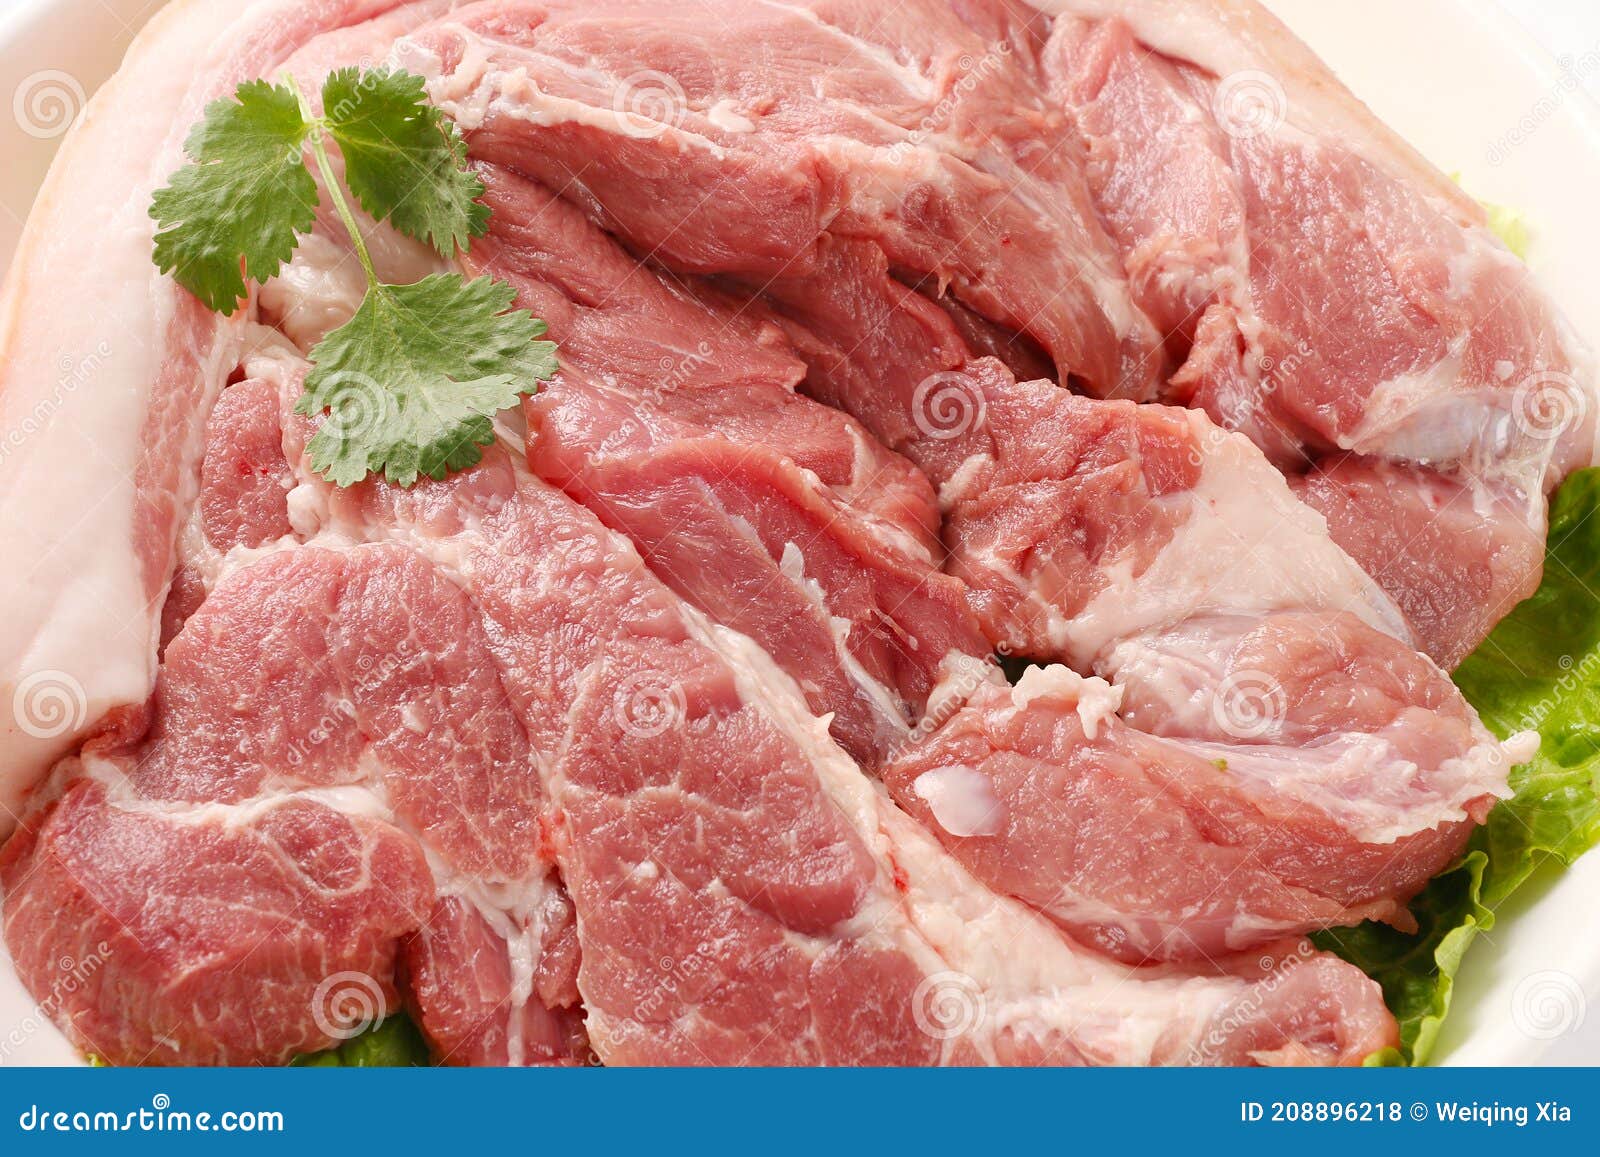 slices of pork with rosemary  on white background